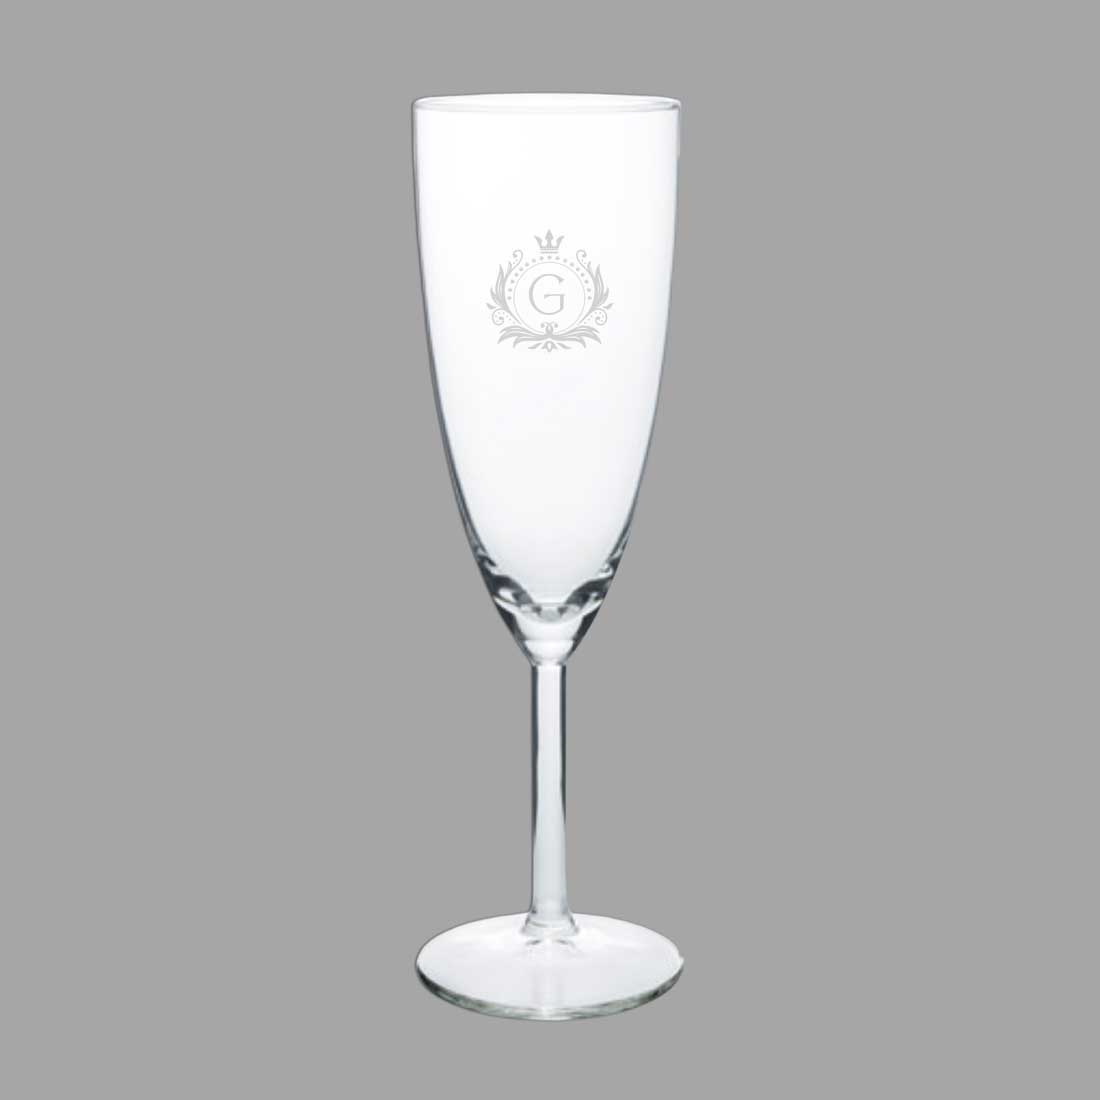 Personalized Engraved Champagne Flutes with Initial